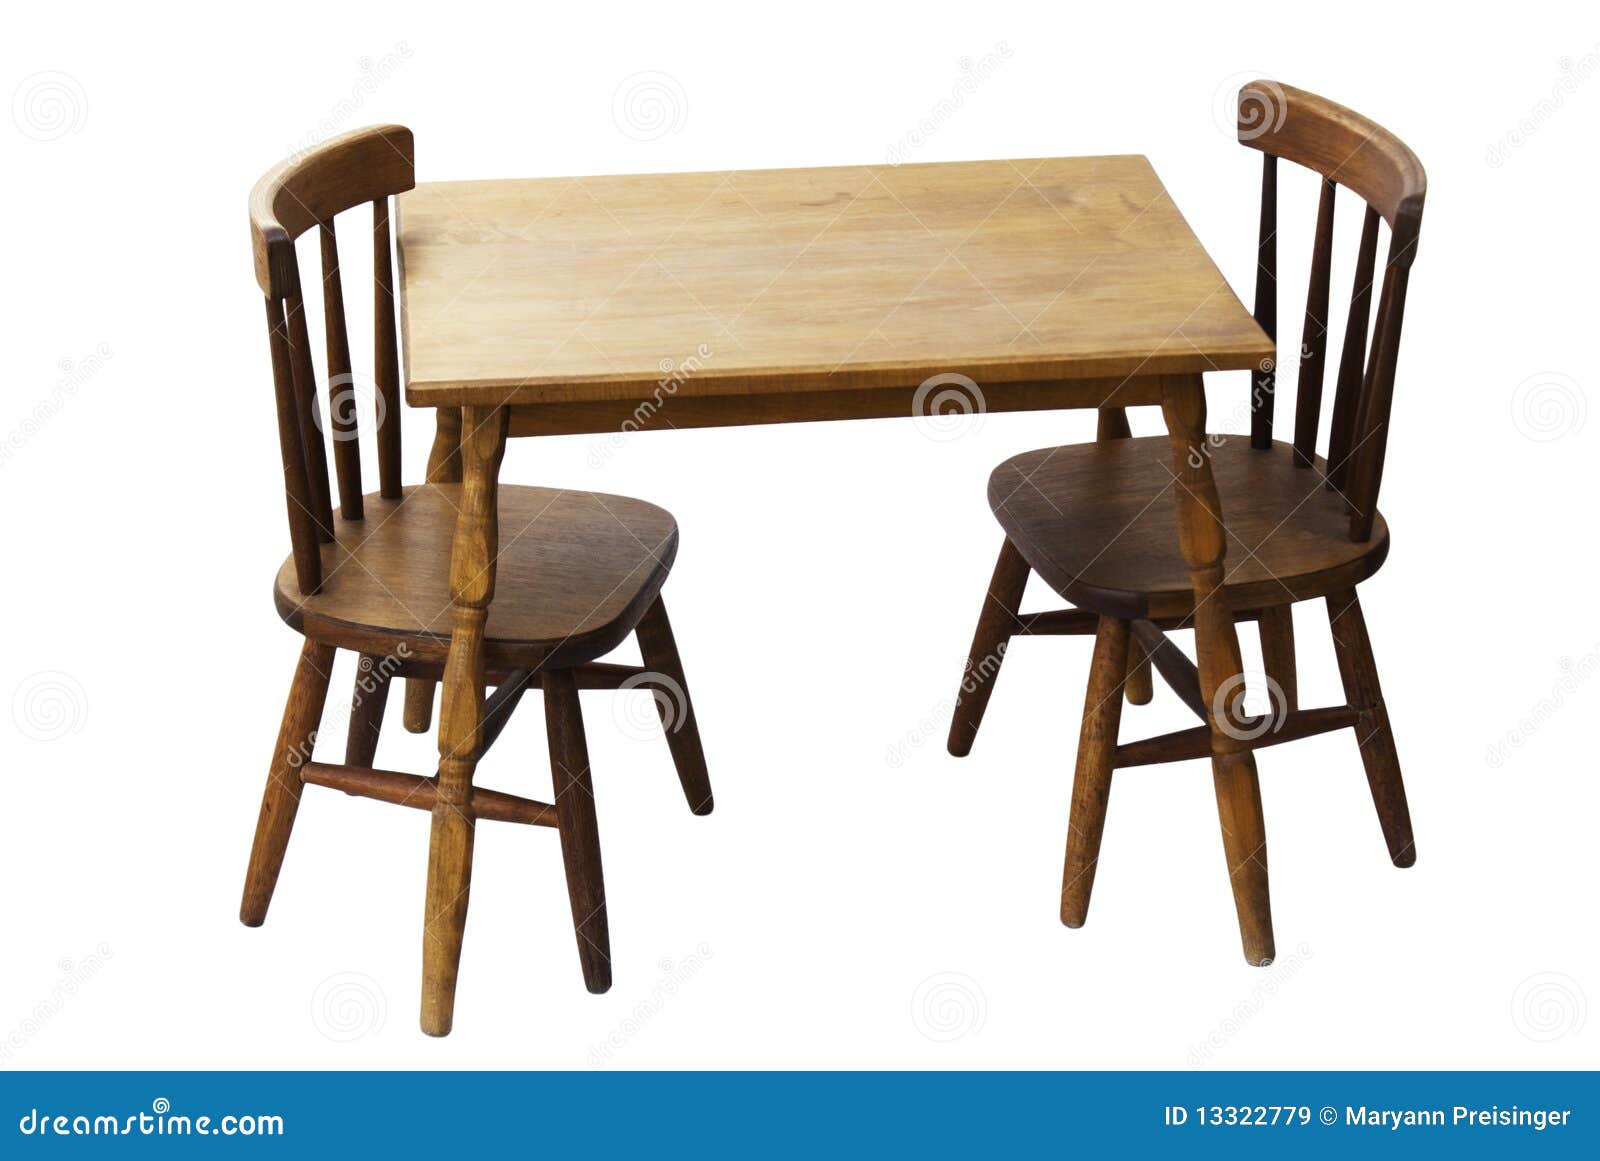 Wood Children's Table and Chairs